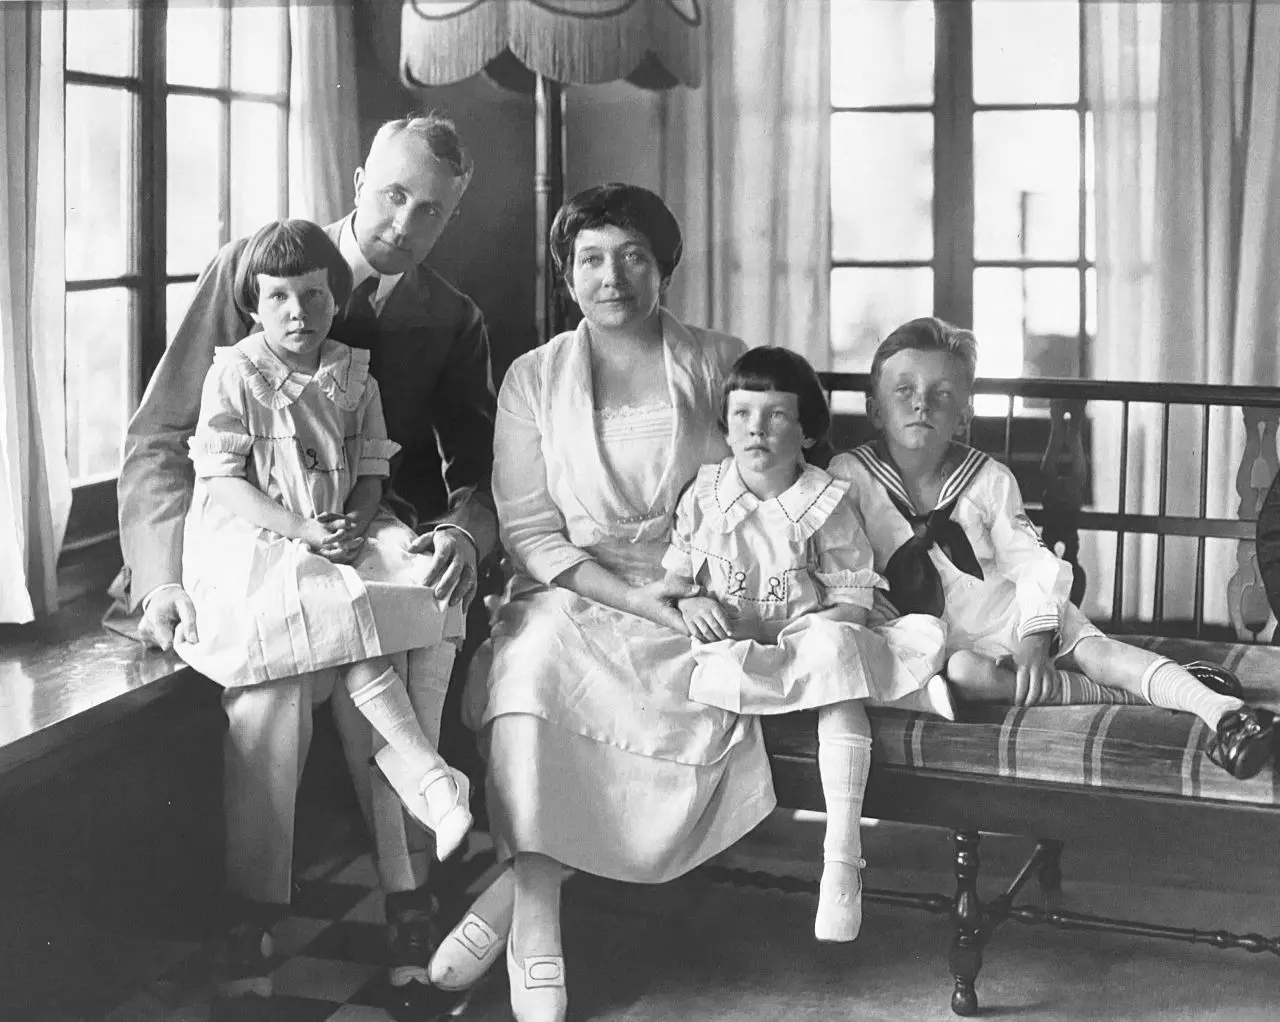 Family portrait: William K Terry Sr., Helen Wright Suydam Terry, Margaret Terry (left), Mary Ann Terry (right) and William K. Terry Jr.  Circa 1920.  The family owned a cottage on Grove Avenue.  William K Terry took a video at the Middle Bass Club in 1933 which is included on this website.  Helen's brother Horace Wright Suydam took a video at the Middle Bass Club in 1928 which is included on this website.  Source: Carroll Terry